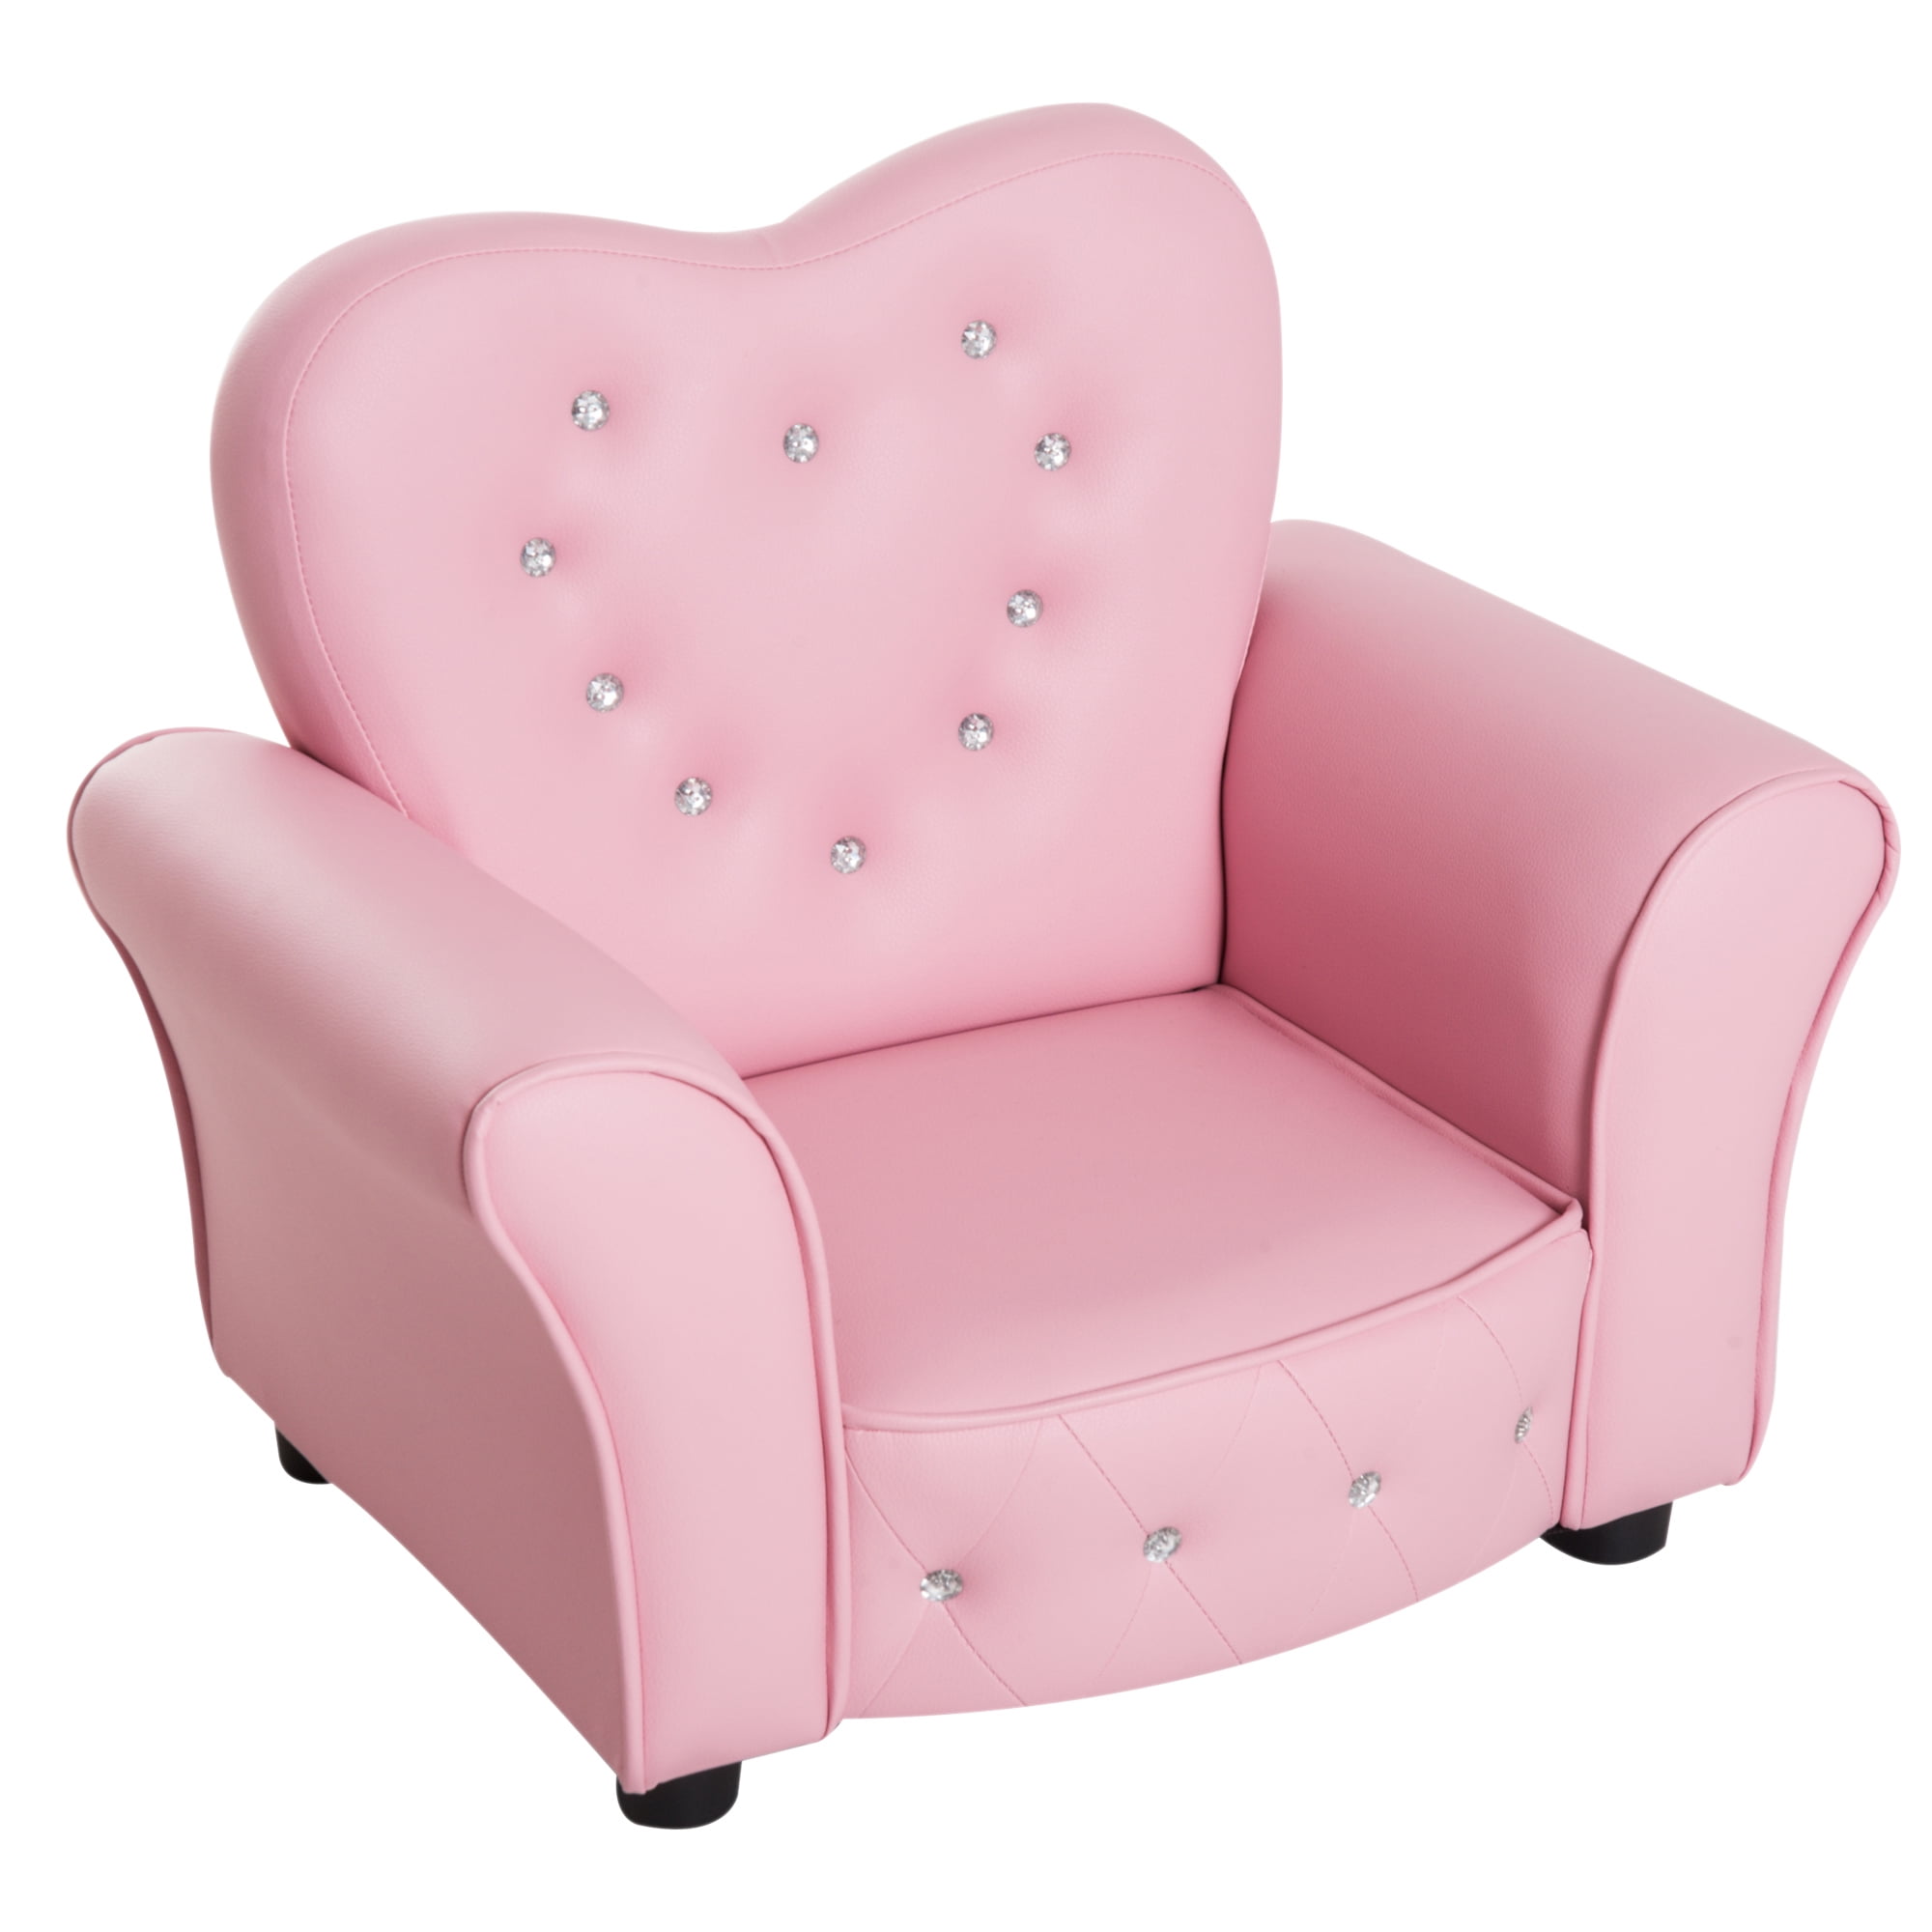 Kids Mini Princess Sofa Chair Upholstered Tufted Armchair Toddler Gift Pink 